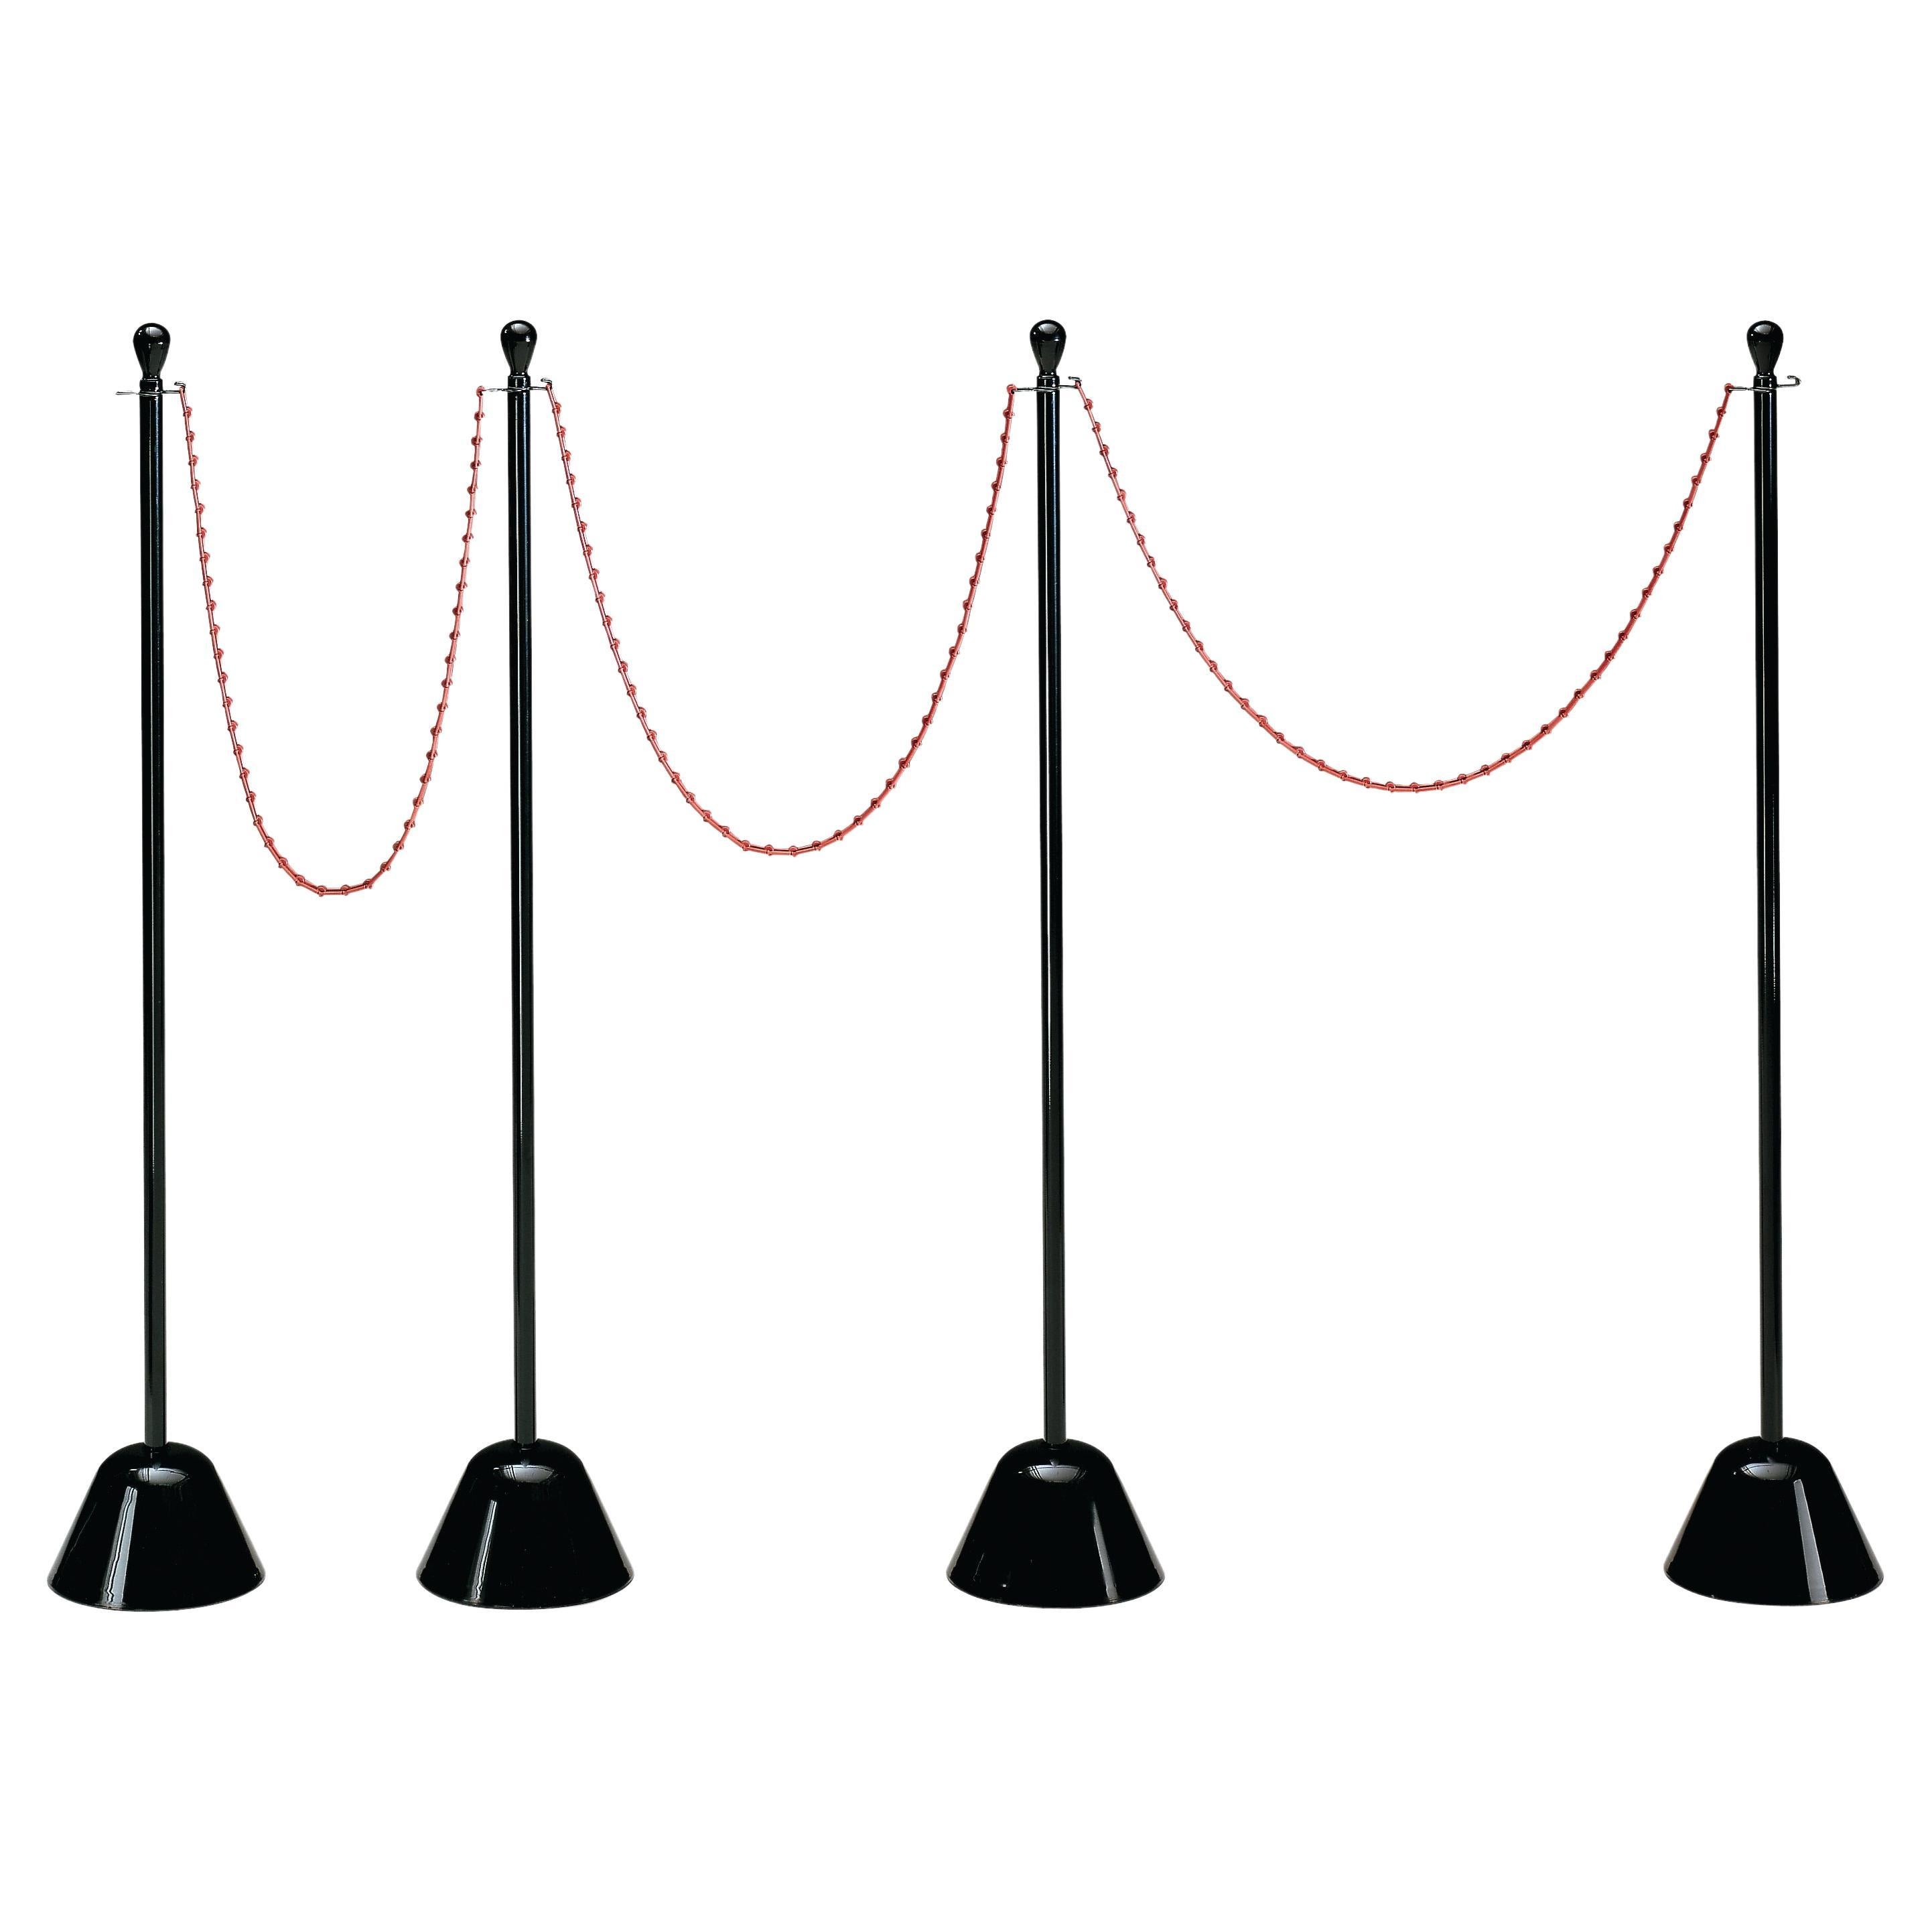 Zanotta Servostop Partion System in Red Painted Steel Chain & Black Steel Rod  For Sale